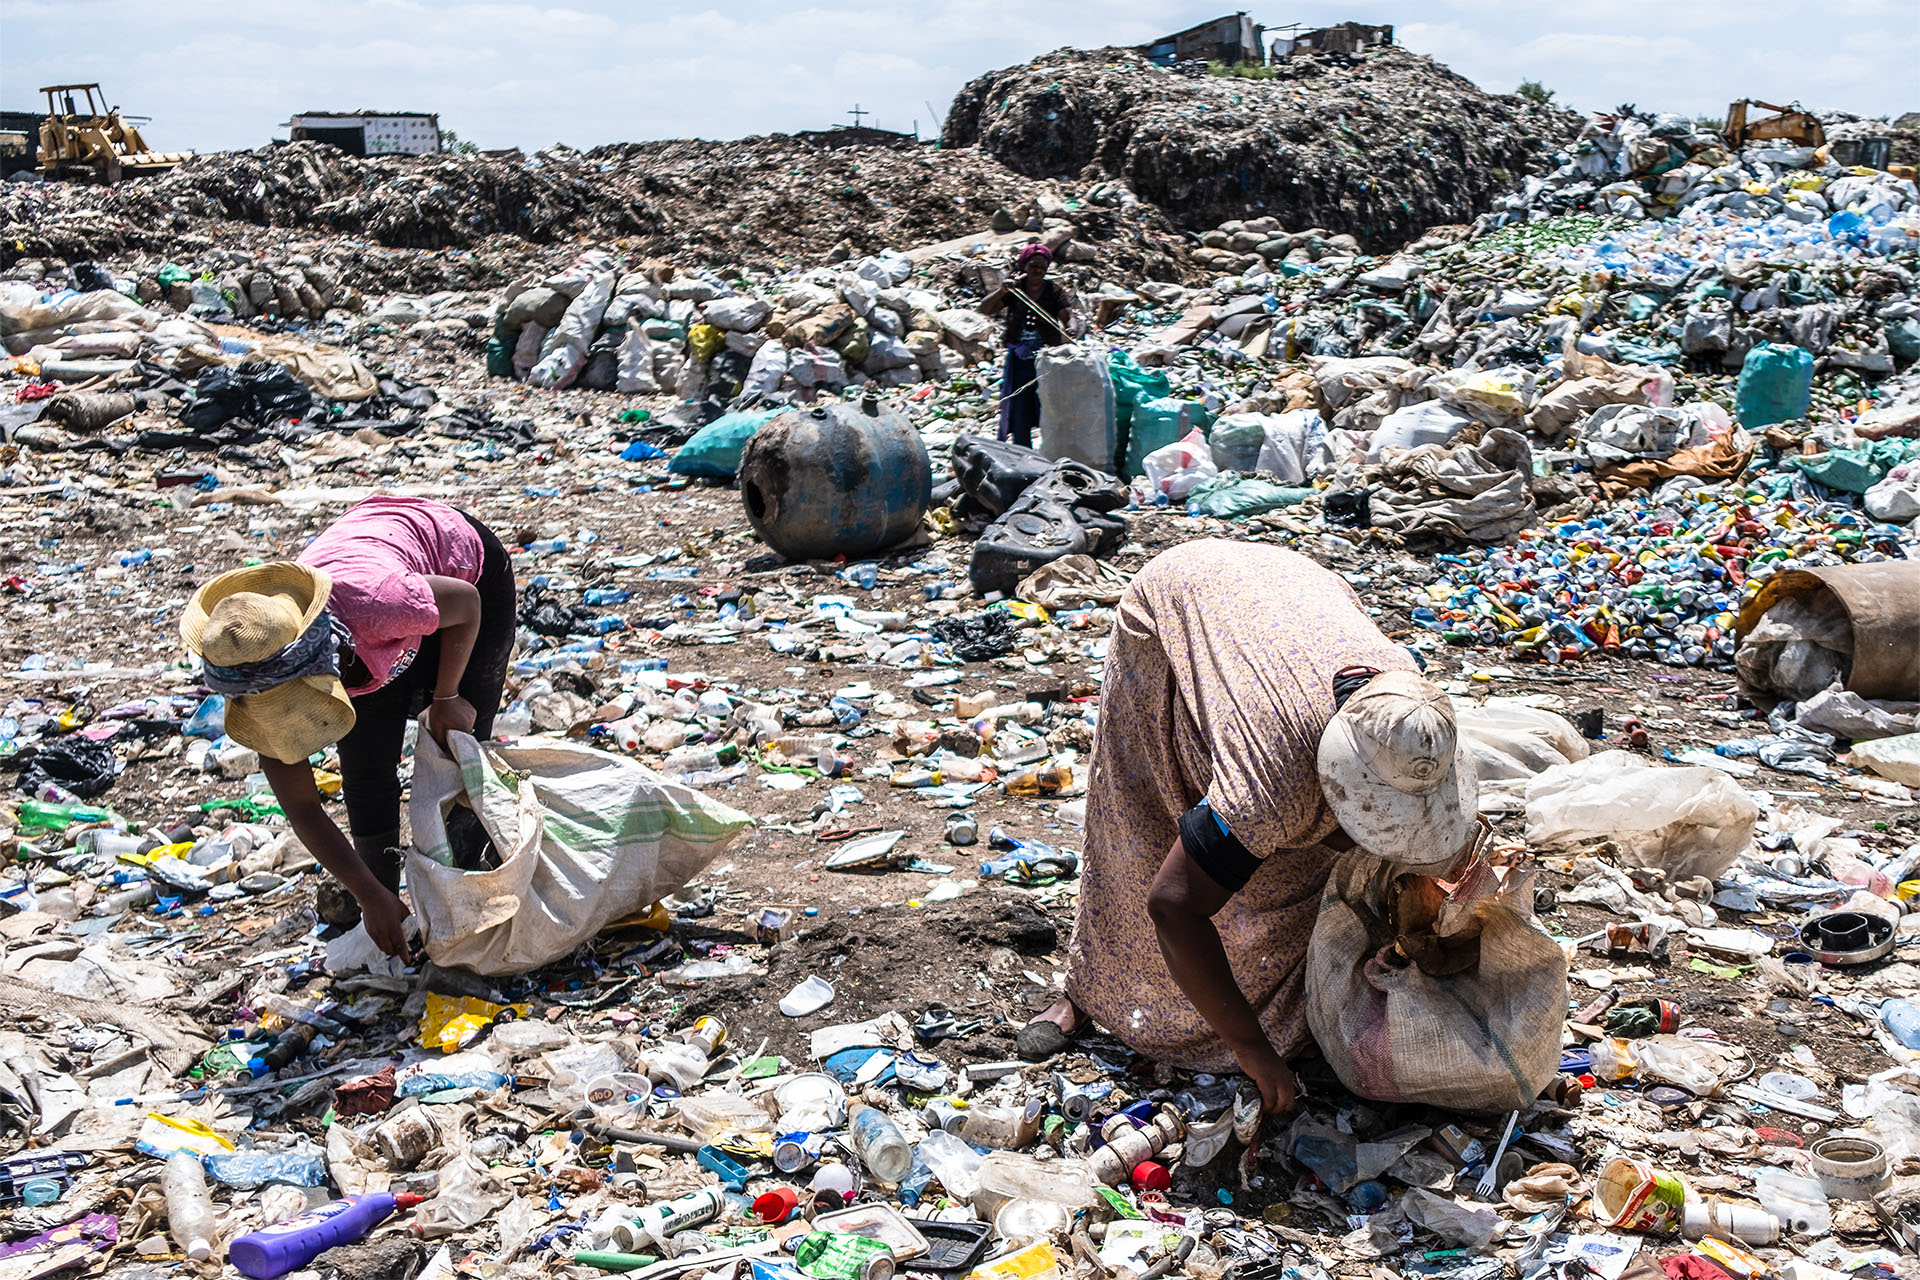 A photo of two women picking up trash at a dumpsite